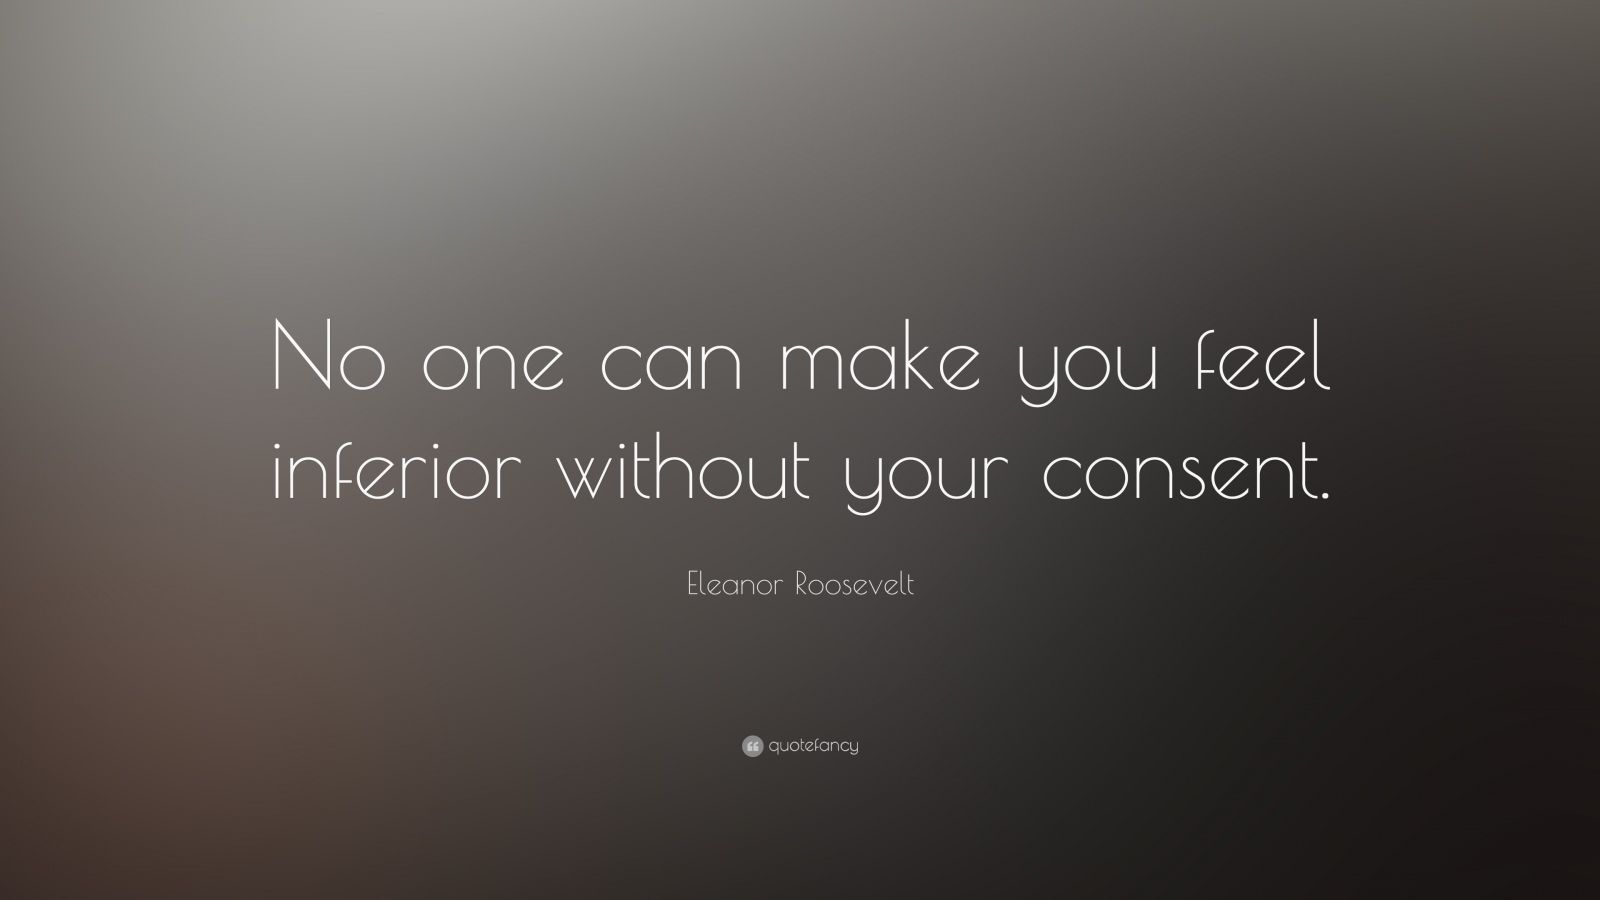 Eleanor Roosevelt Quote: “No one can make you feel inferior without your consent.”